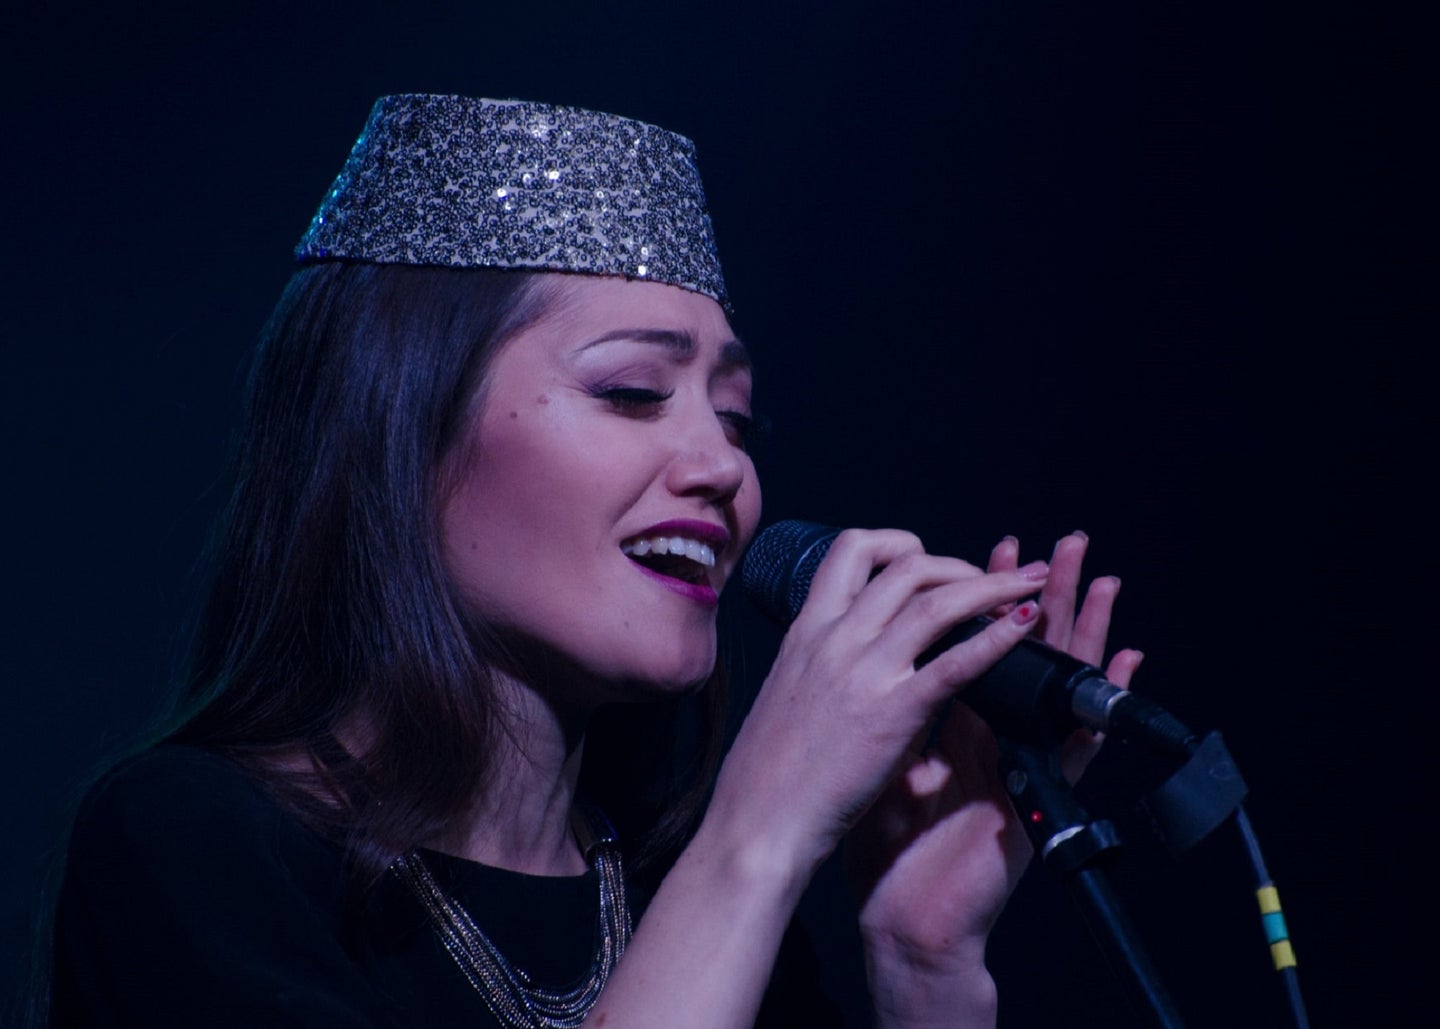 Person with long black hair and in silver sequin hat at microphone